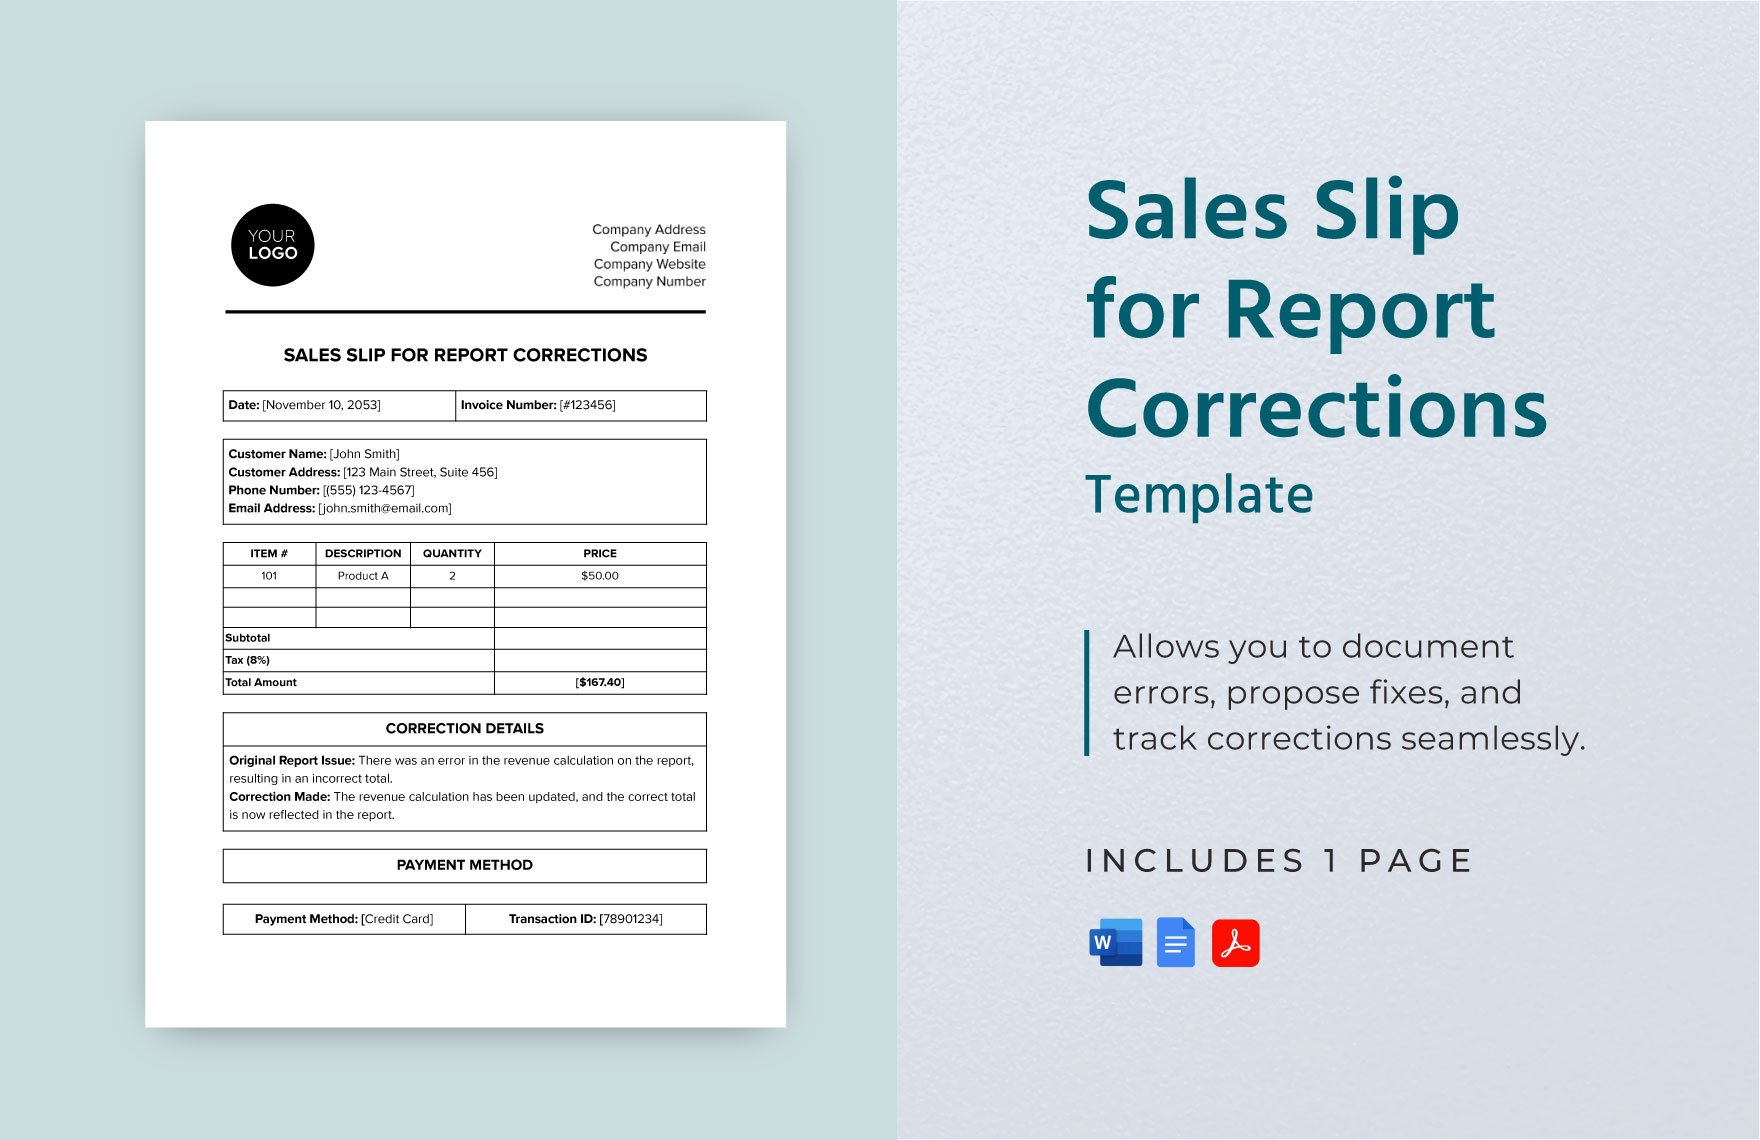 Sales Slip for Report Corrections Template in Word, Google Docs, PDF